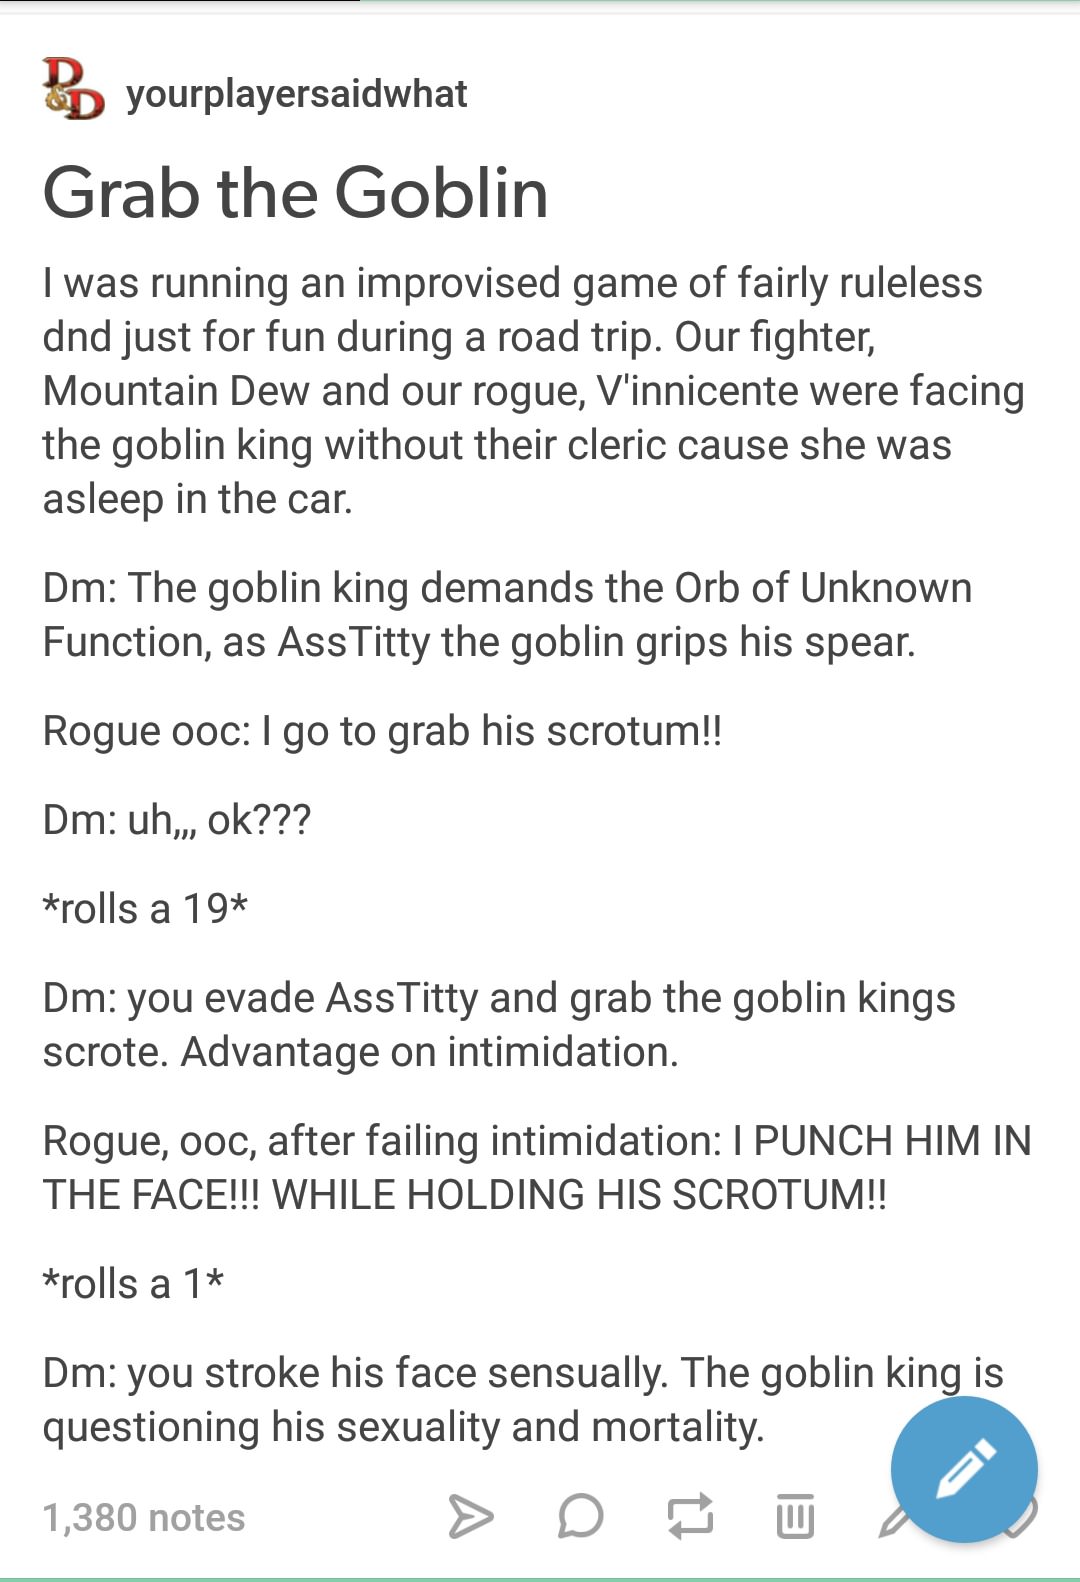 dnd text memes - Bd yourplayersaidwhat Grab the Goblin I was running an improvised game of fairly ruleless dnd just for fun during a road trip. Our fighter, Mountain Dew and our rogue, V'innicente were facing the goblin king without their cleric cause she